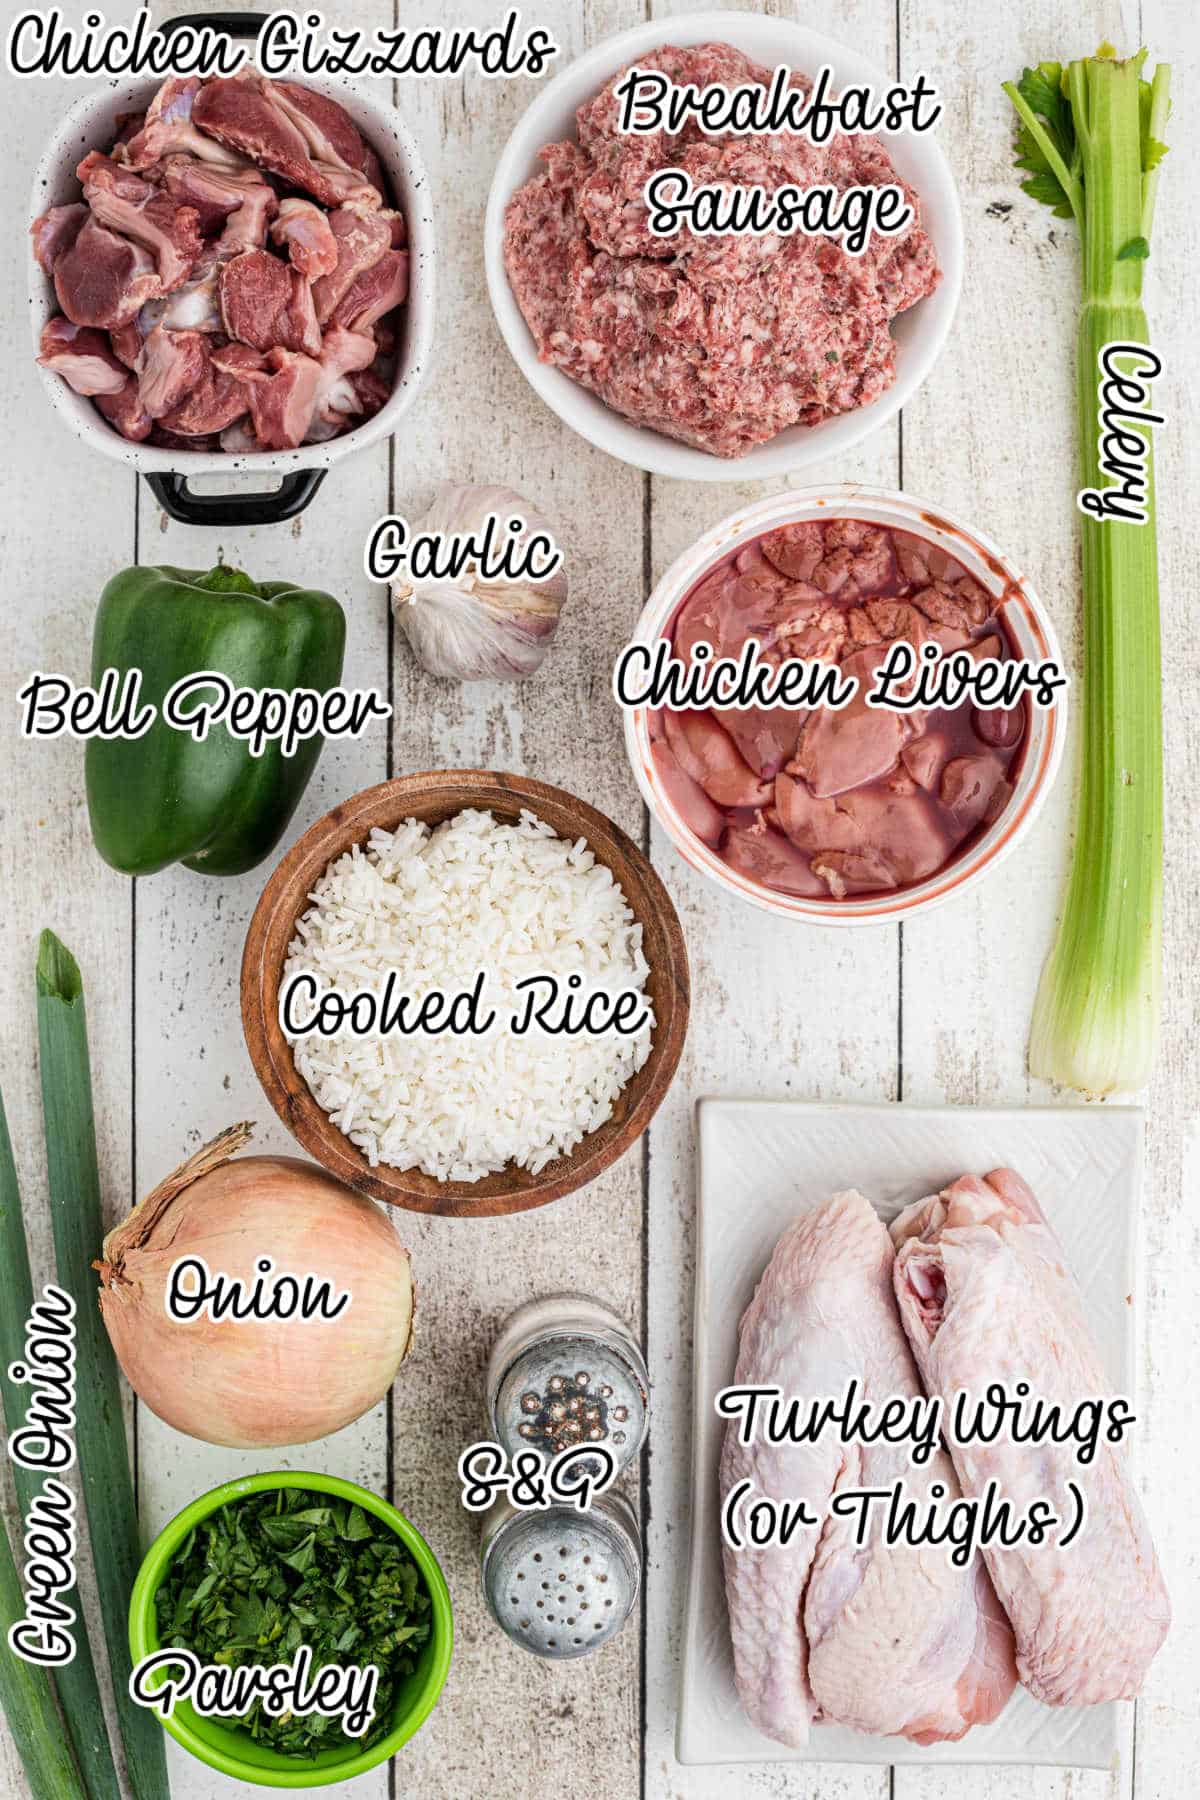 Overhead shot of ingredients needed to make a Cajun rice dressing.